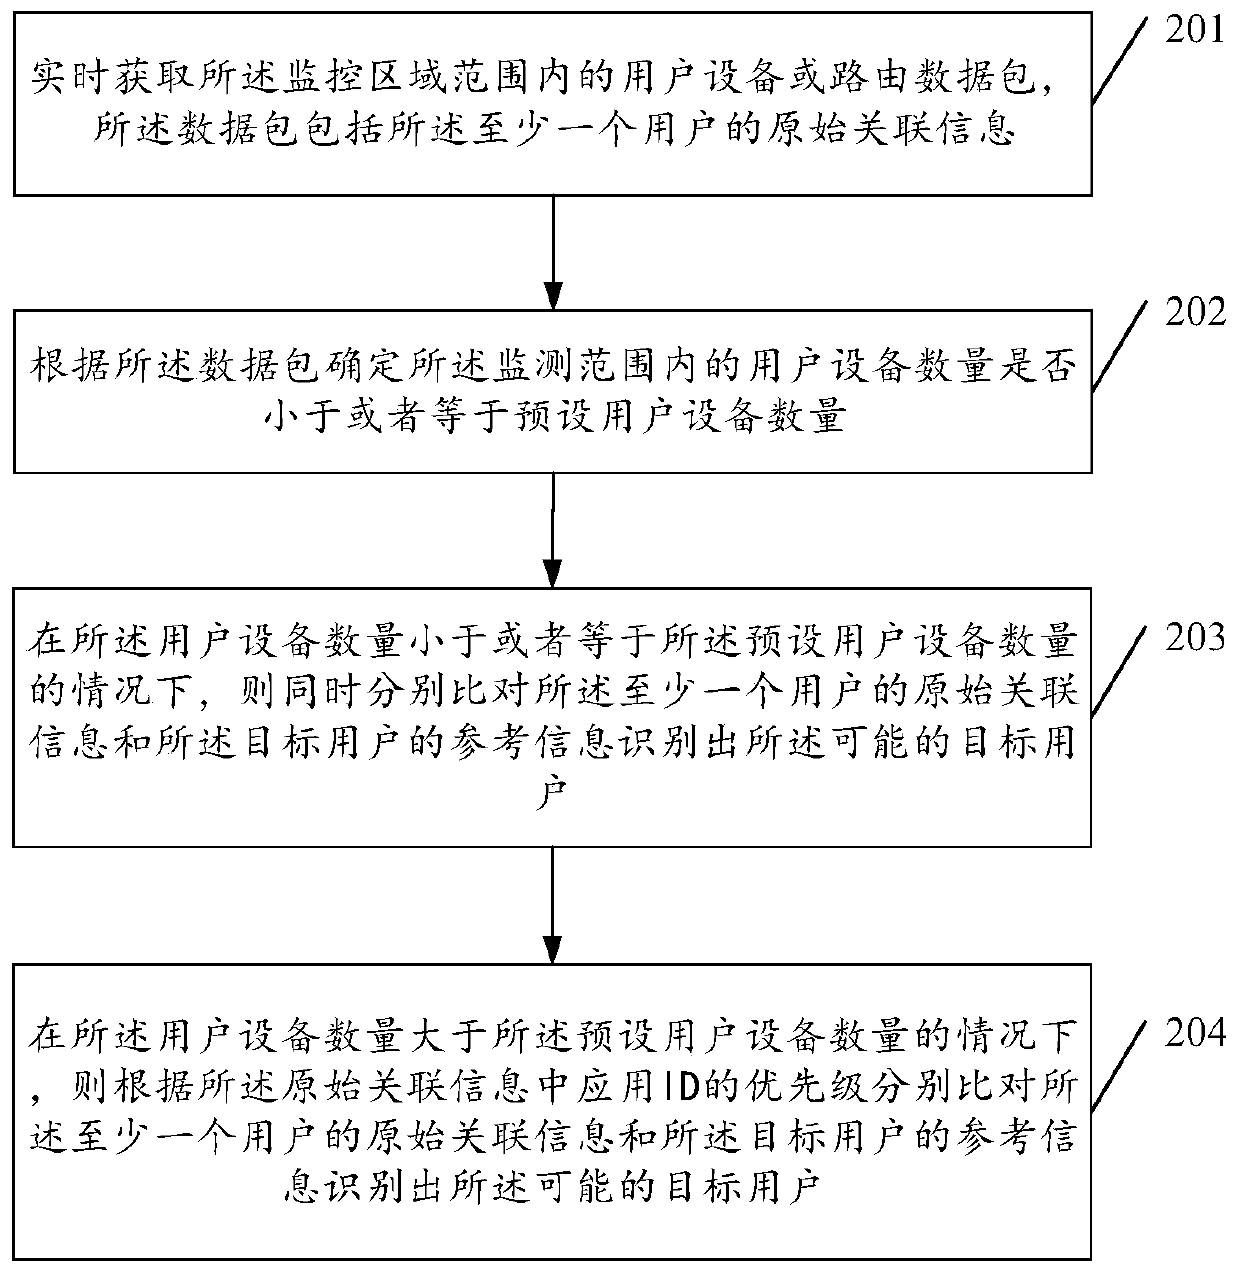 An information processing system and method